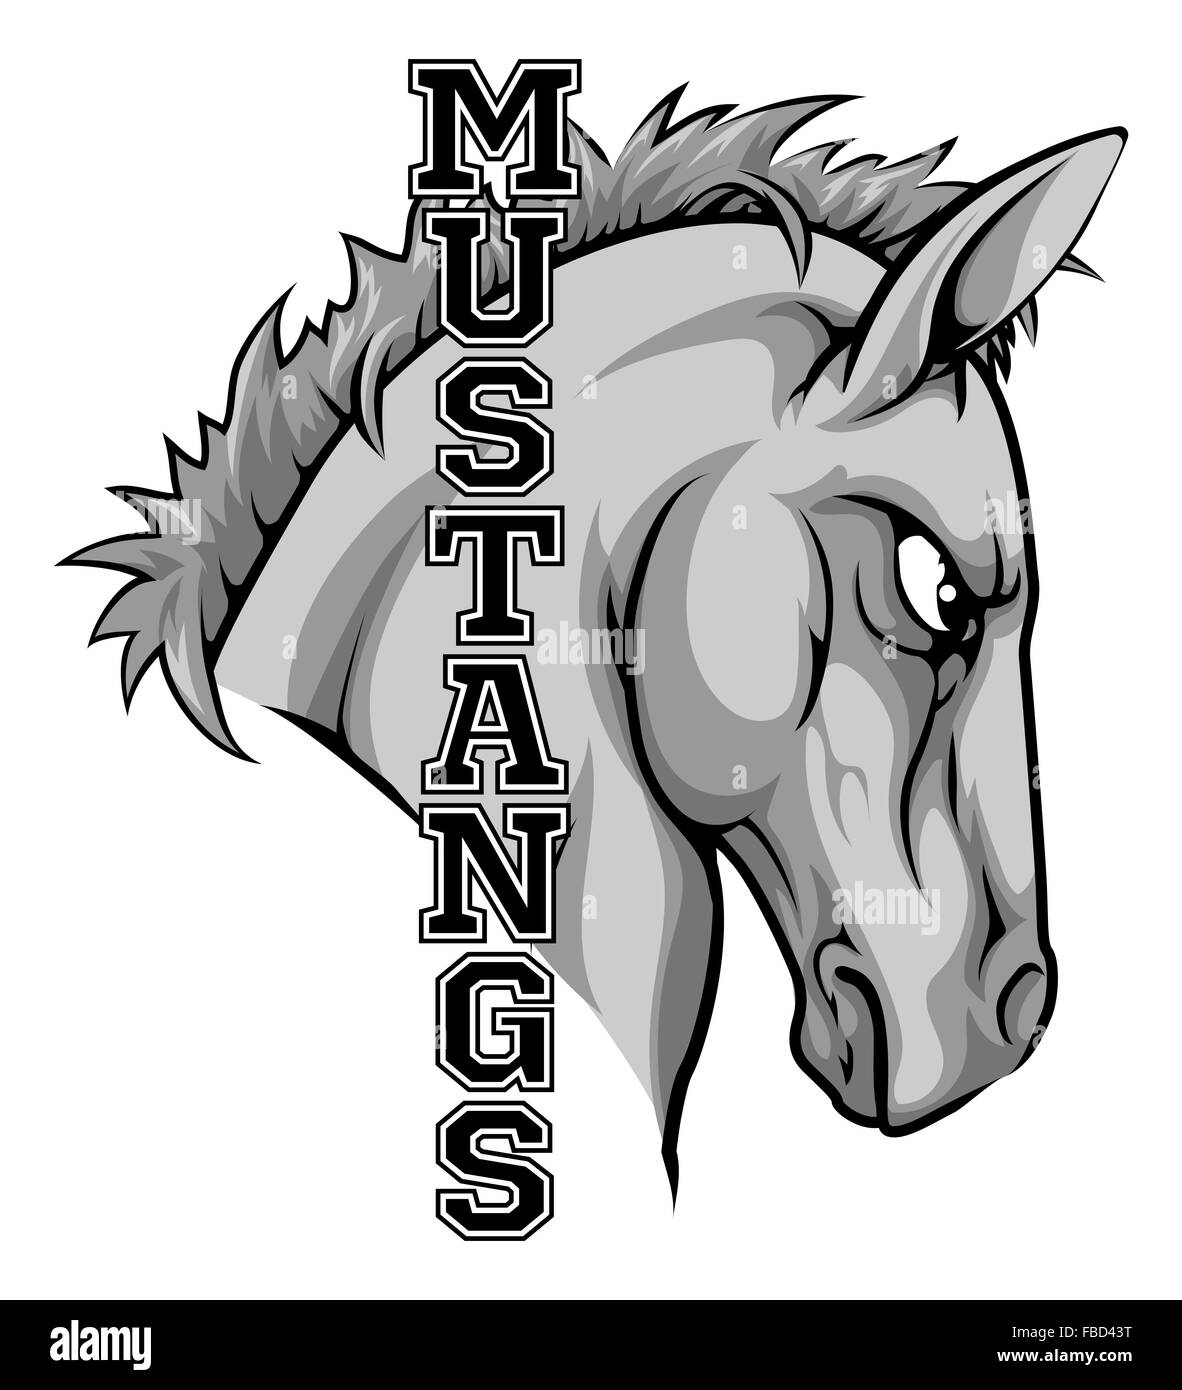 An illustration of a cartoon horse sports team mascot with the text Mustangs Stock Photo